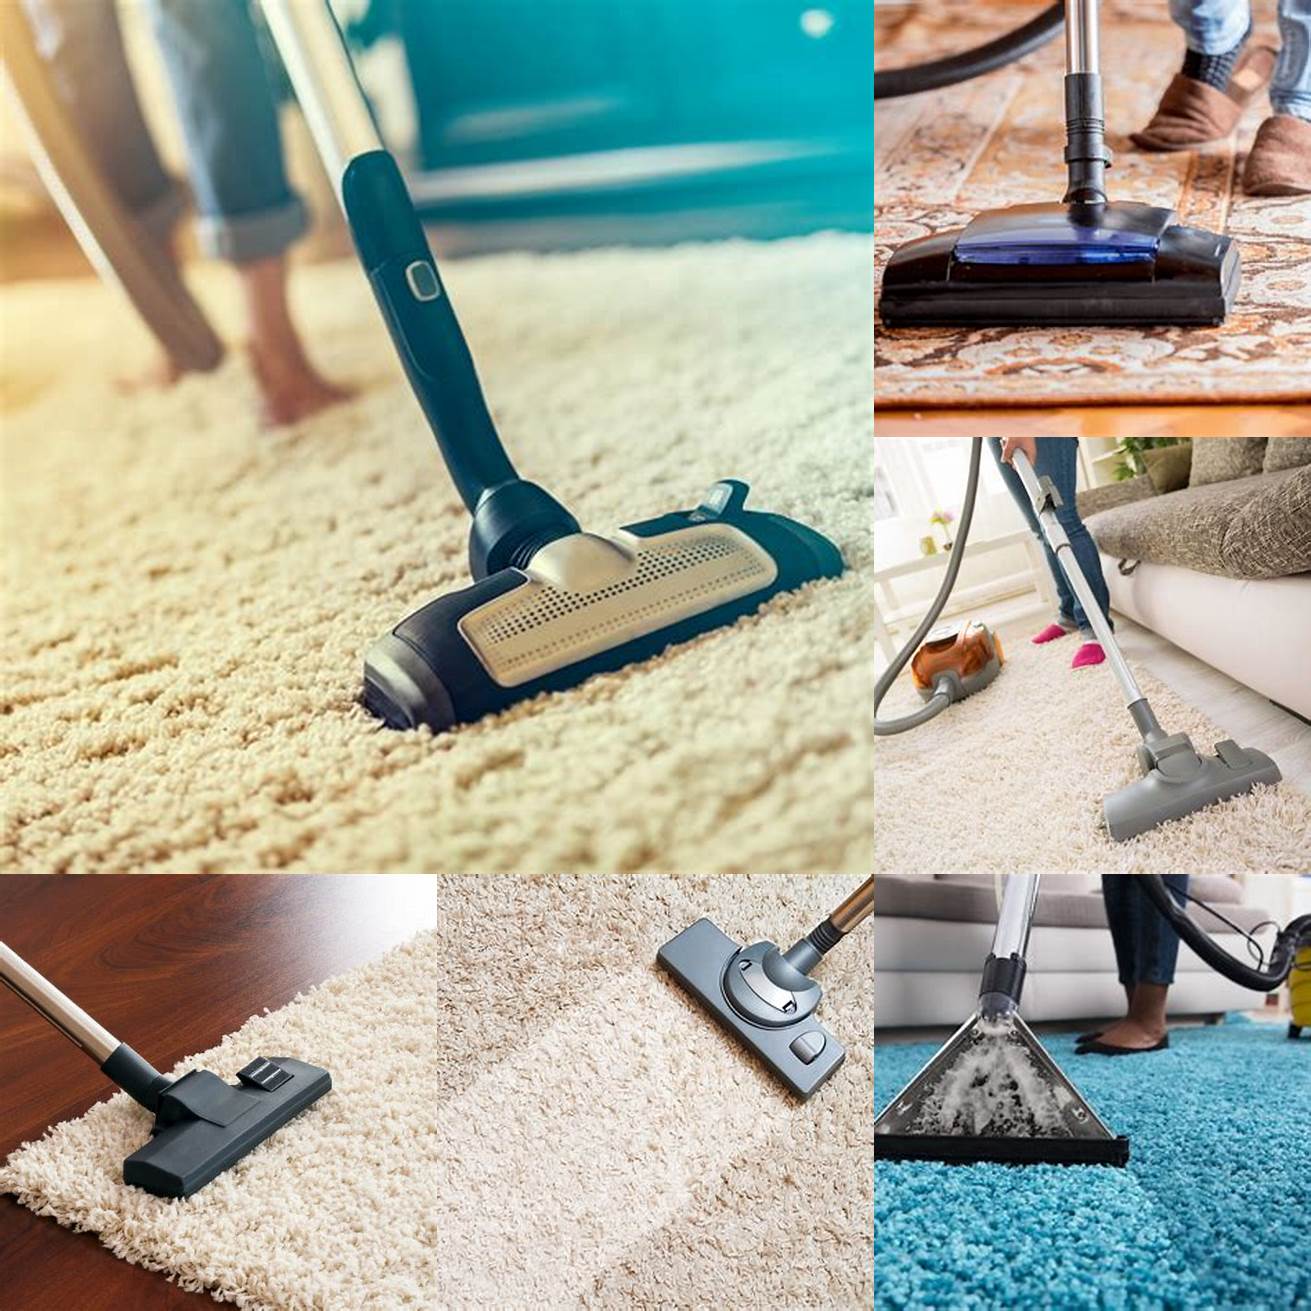 Vacuum your rug regularly to remove dirt and debris